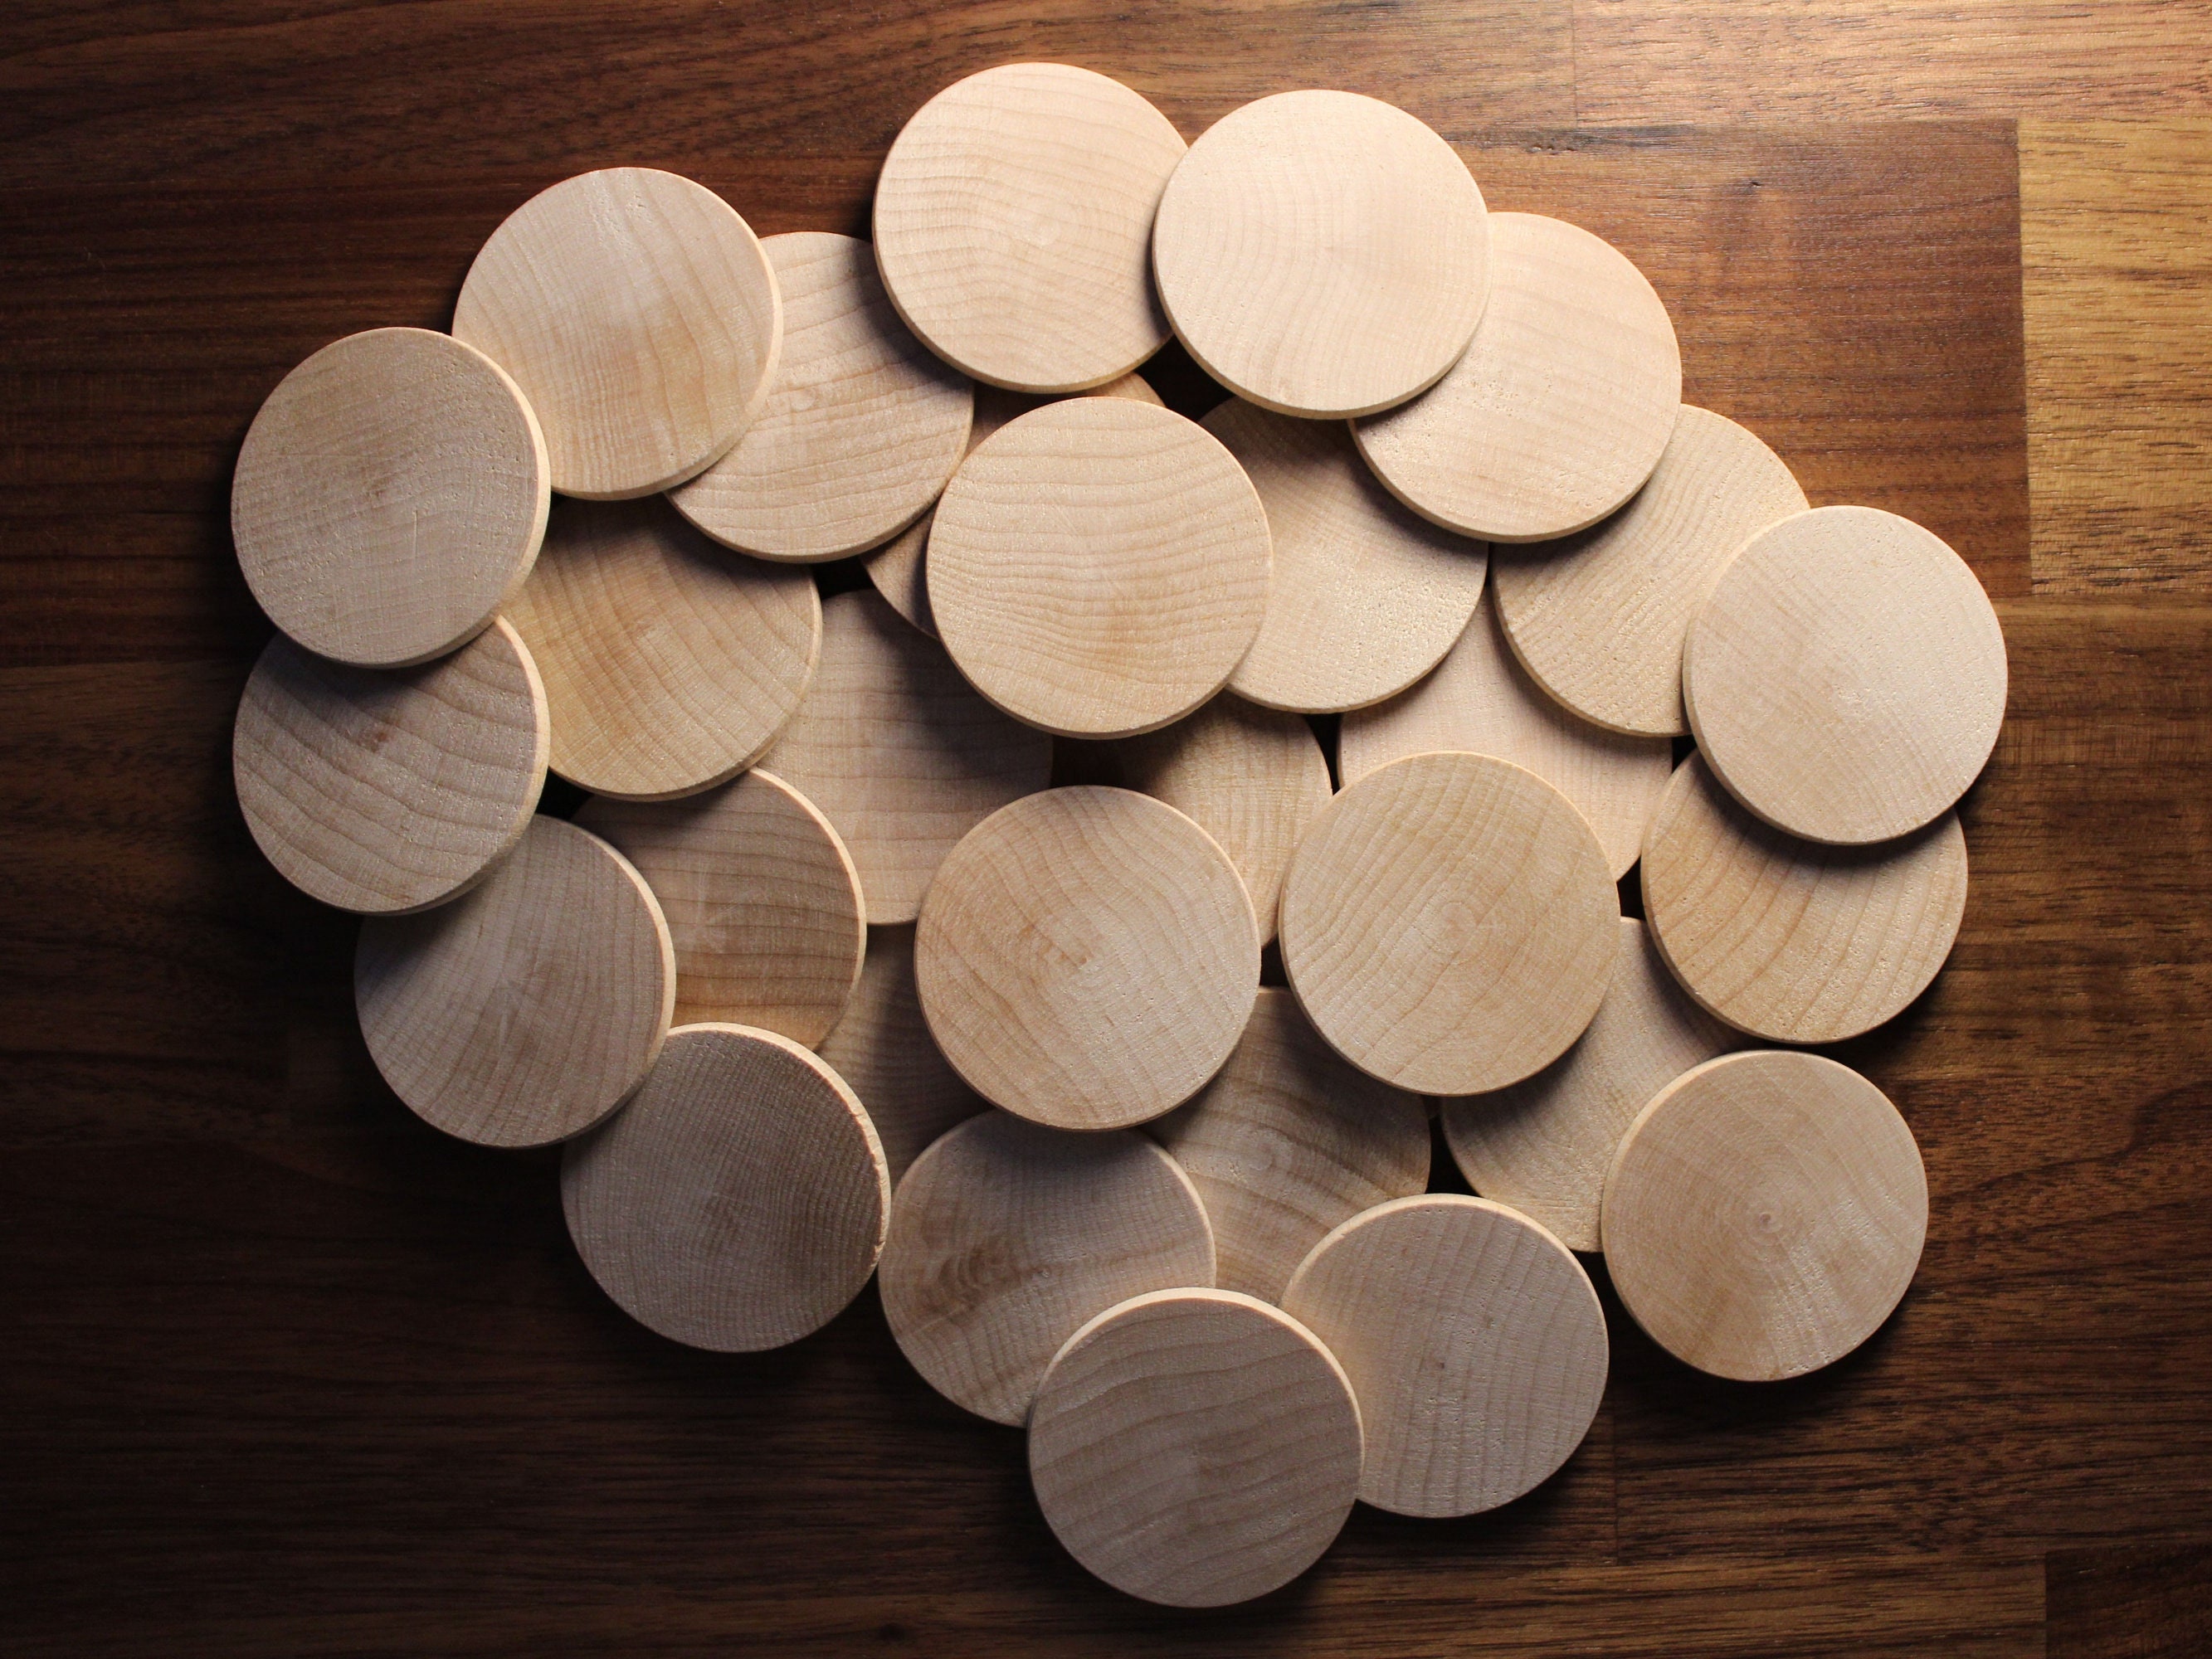 100 Pcs 2 Inch Wood Discs for Craft Wood Coins Unfinished Wood Slices Round  Wooden Tokens Small Blank Wood Cutout Circles Chip for DIY Arts Ornament (